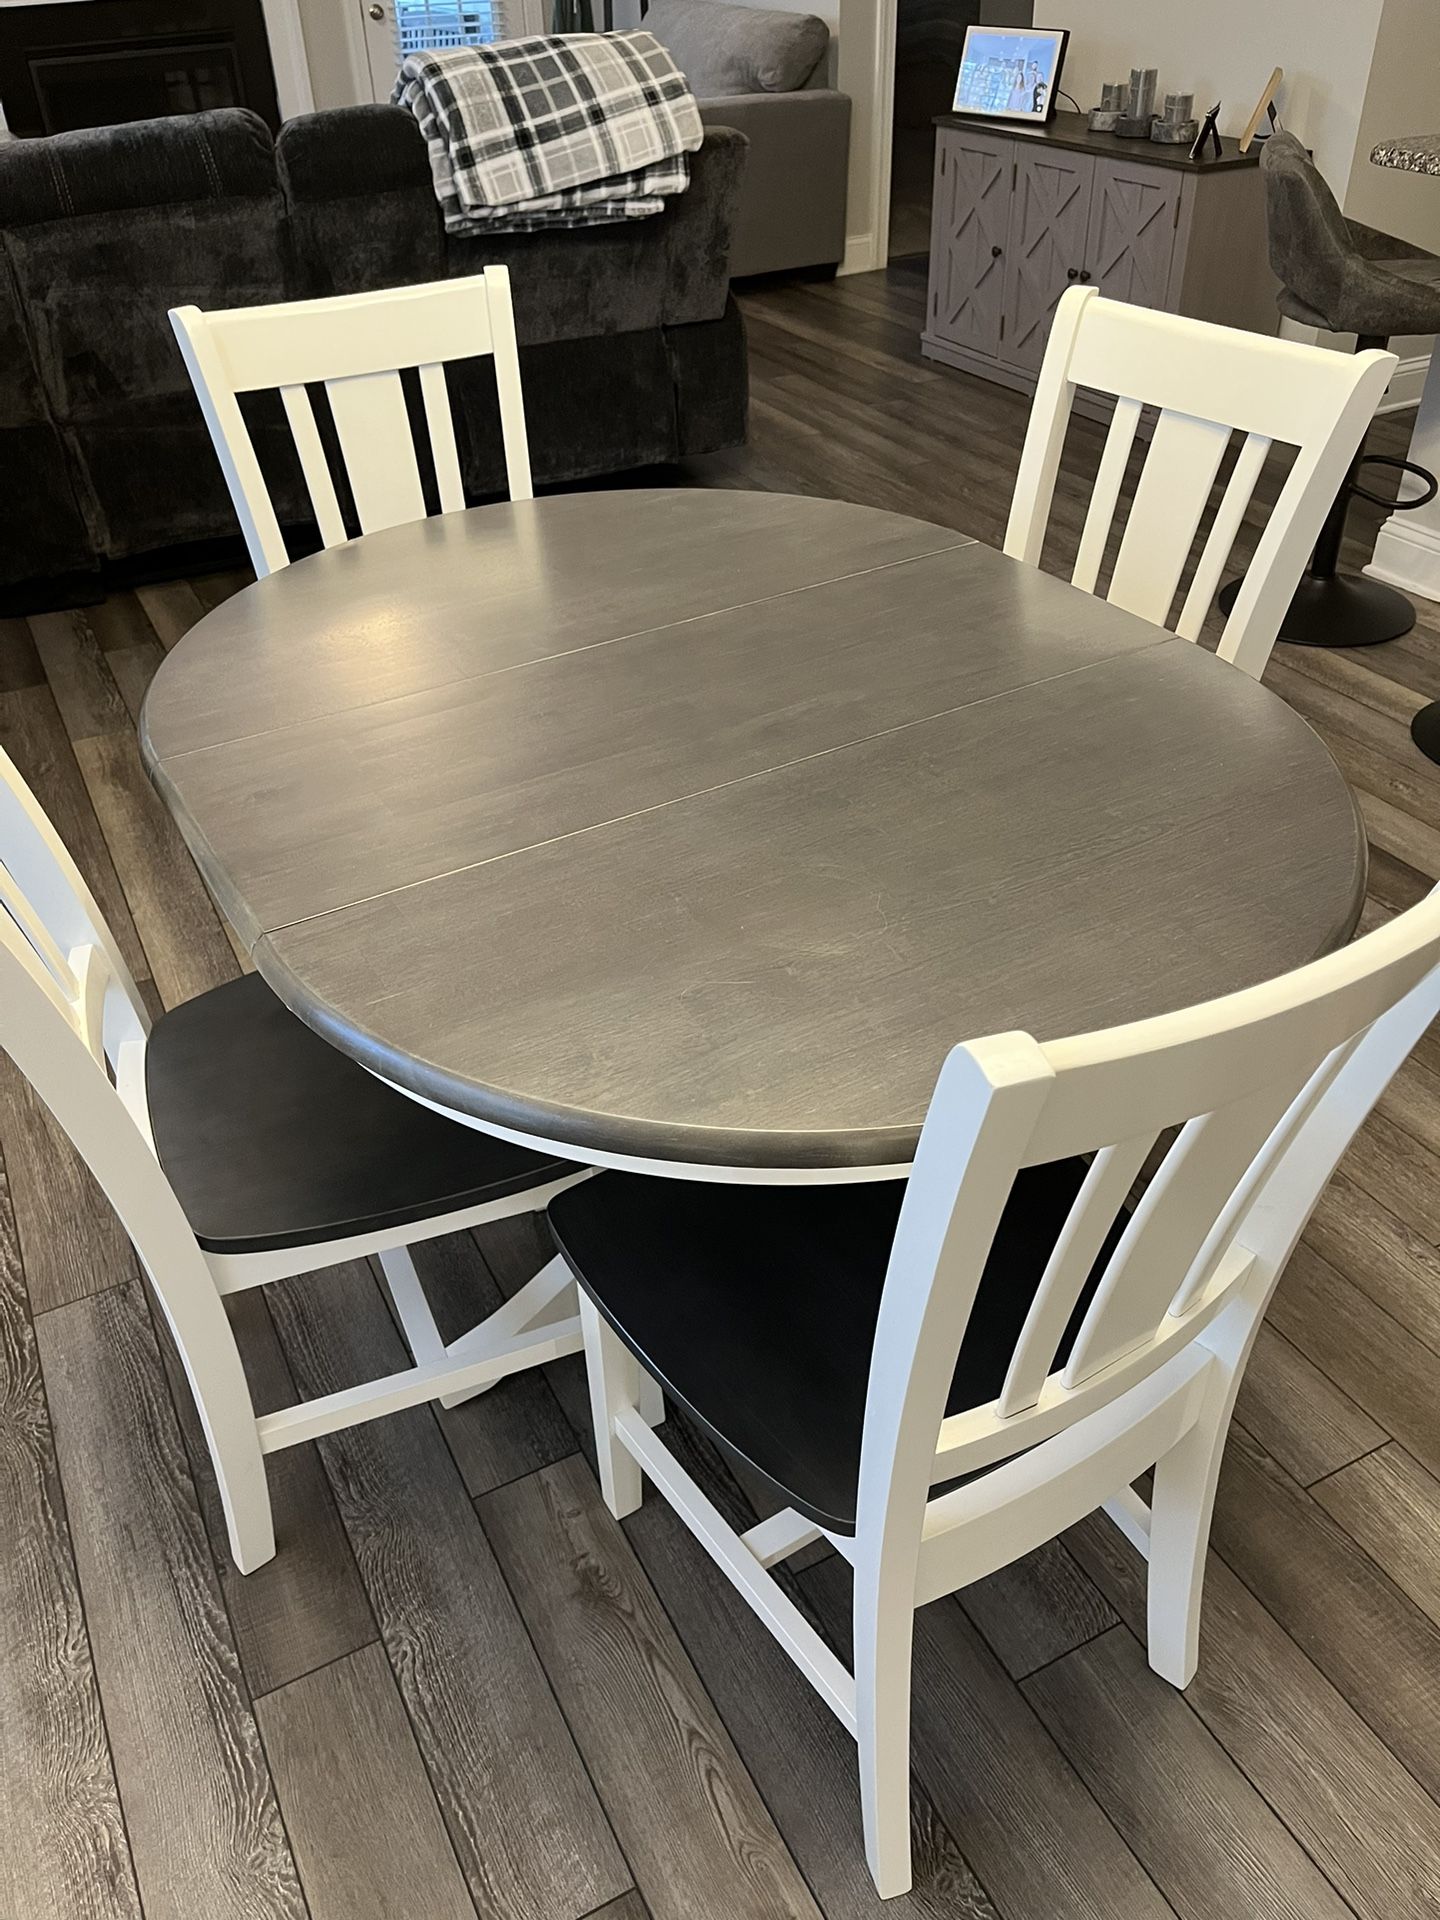 White and Heather Gray Dining Table Set with Leaf and 4 Chairs I